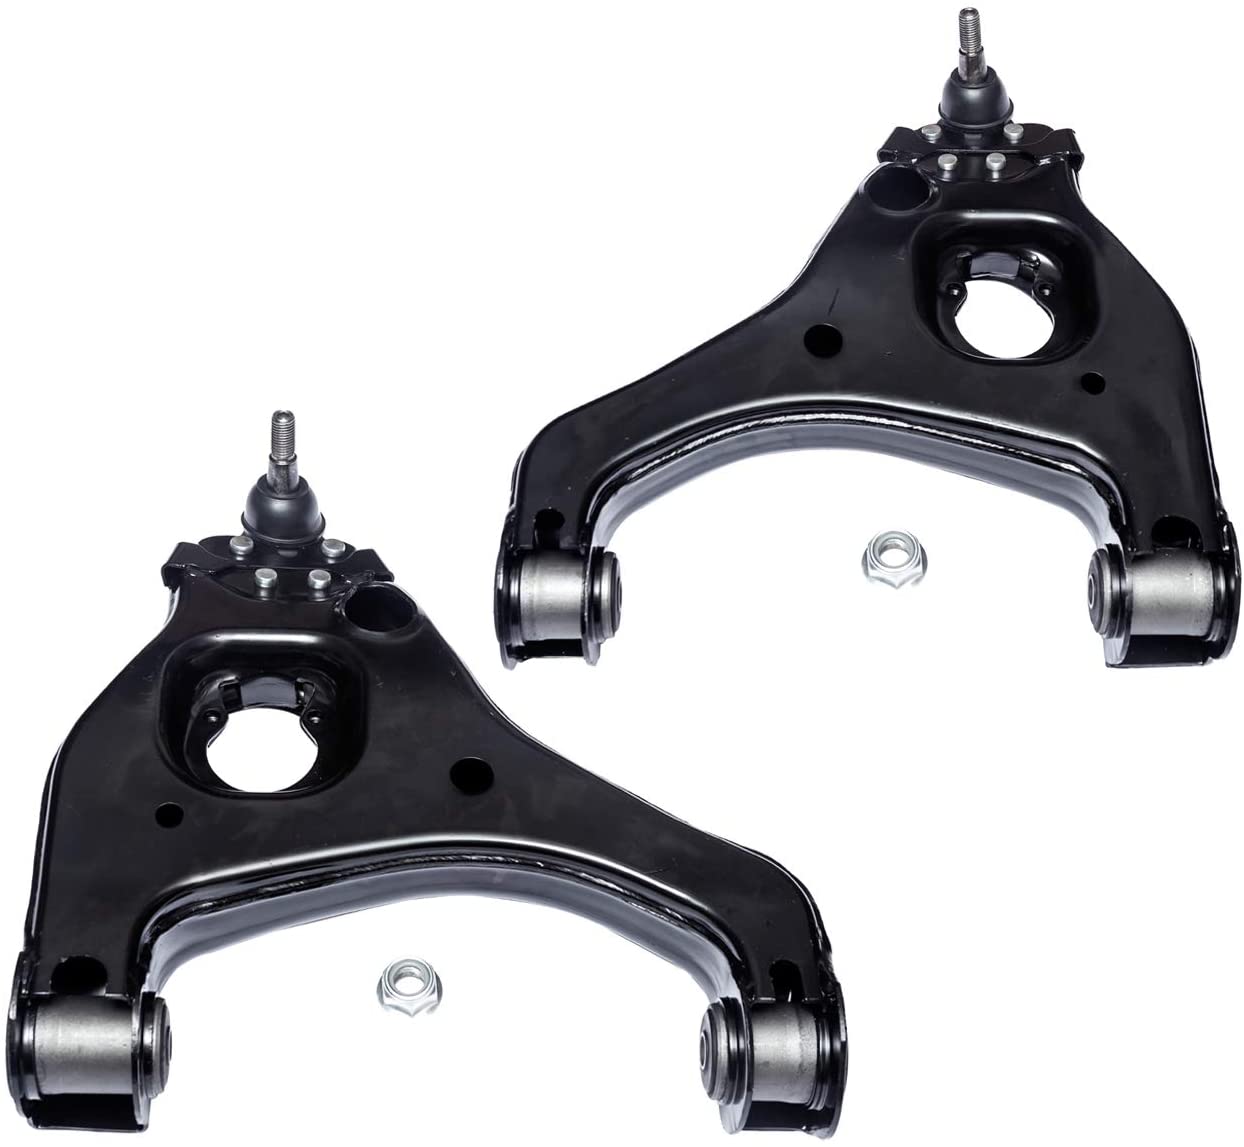 TUCAREST 2Pcs K620264 K620265 Left Right Front Lower Control Arm and Ball Joint Assembly Compatible Chevy Silverado 1500 GMC Sierra 1500 Classic (RWD;Front Spring:Coil) Suspension